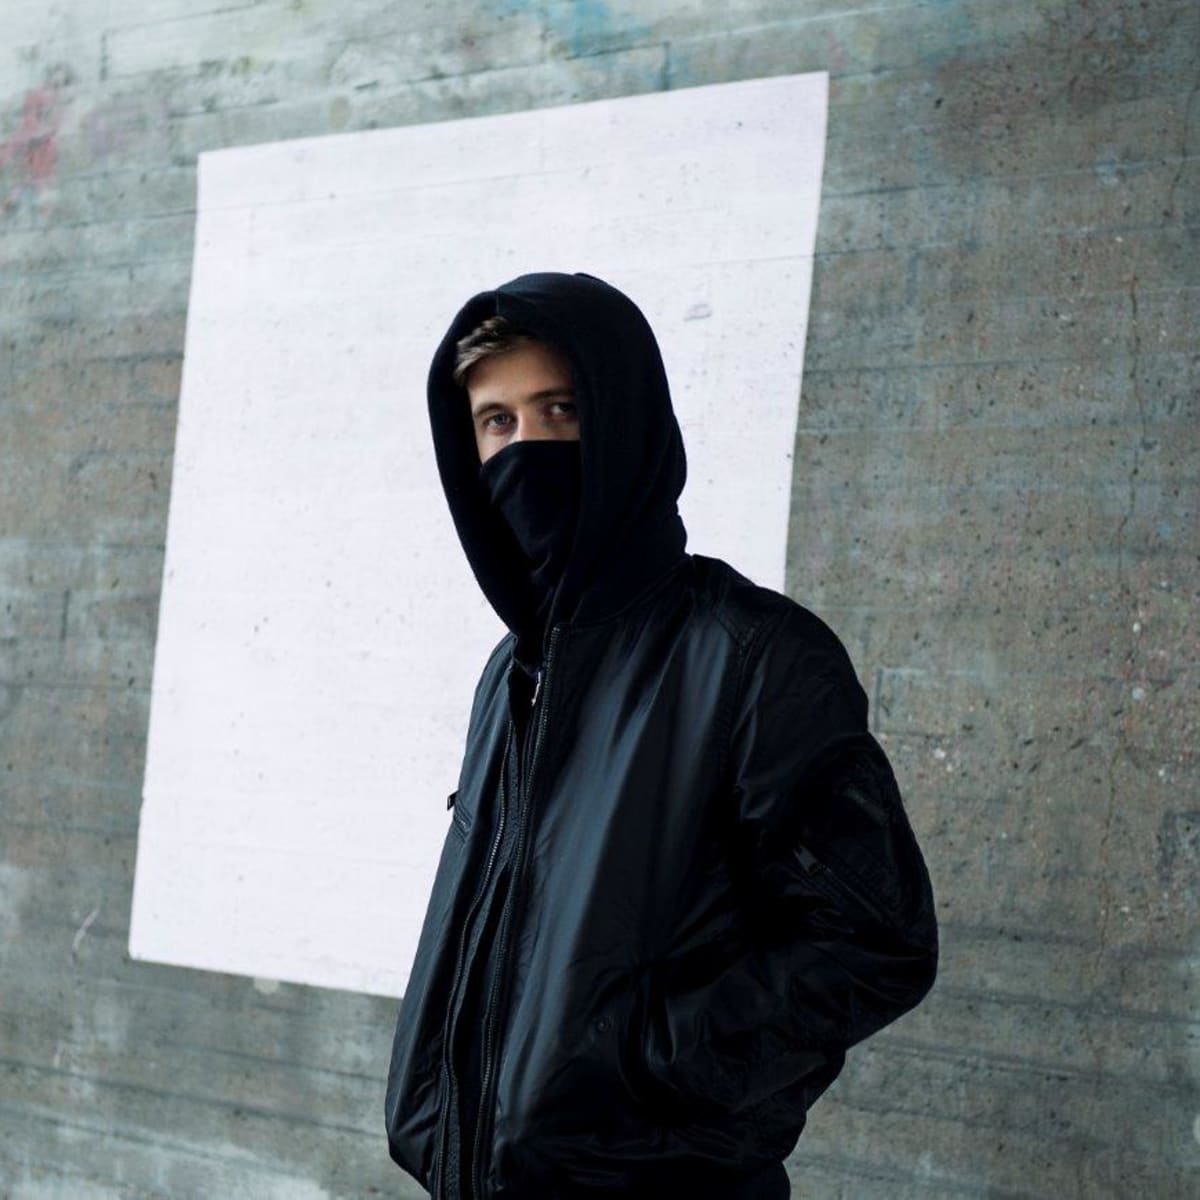 Alan Walker Talks Production New Sound And Vision Ahead Of Debut Album Interview Edm Com The Latest Electronic Dance Music News Reviews Artists